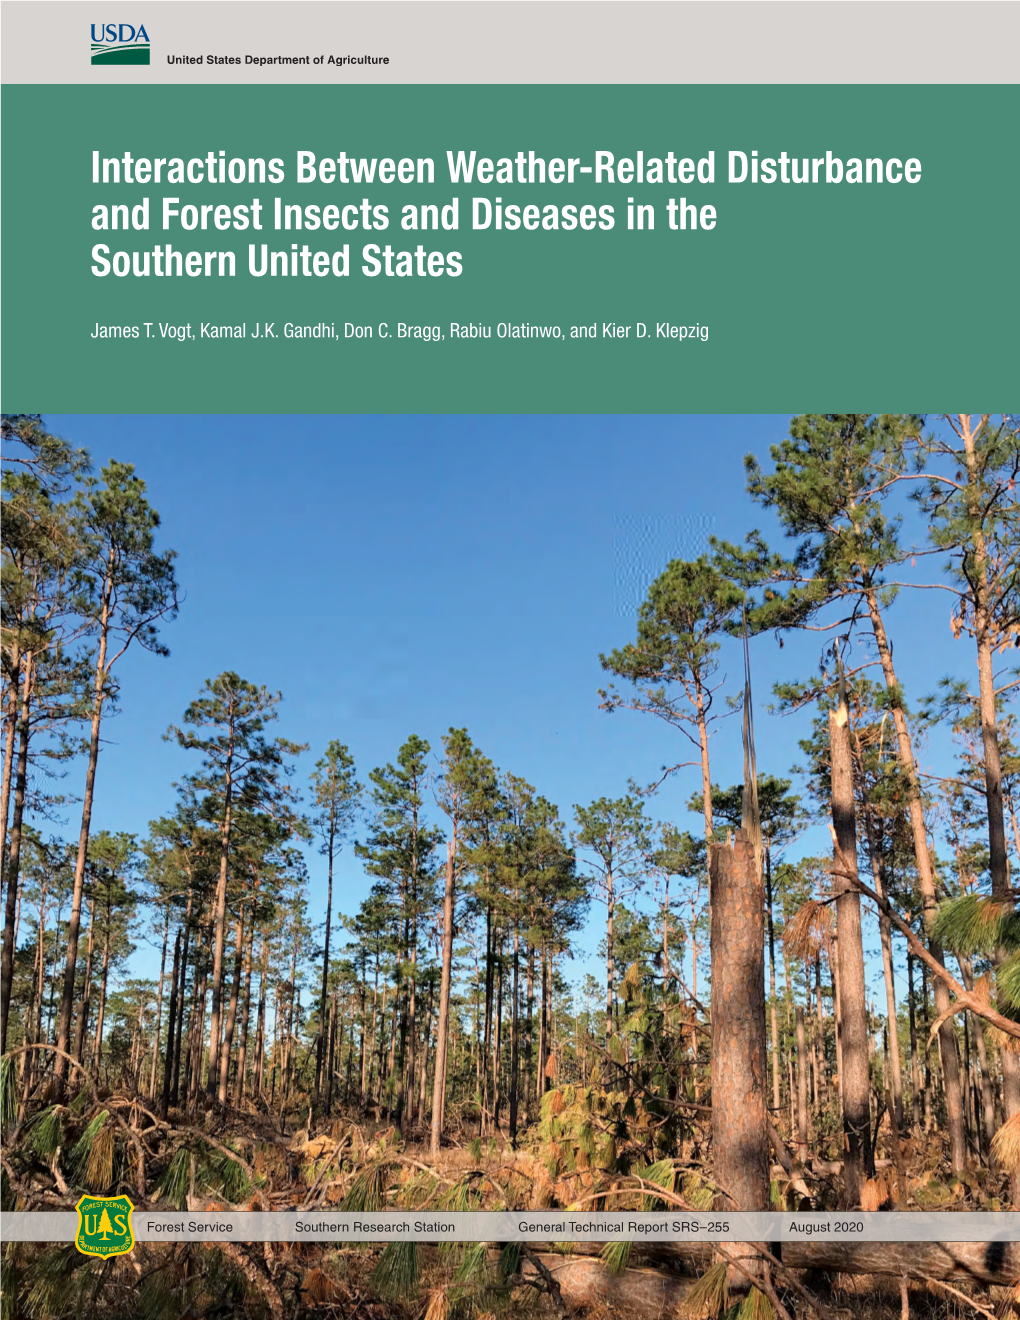 Interactions Between Weather-Related Disturbance and Forest Insects and Diseases in the Southern United States